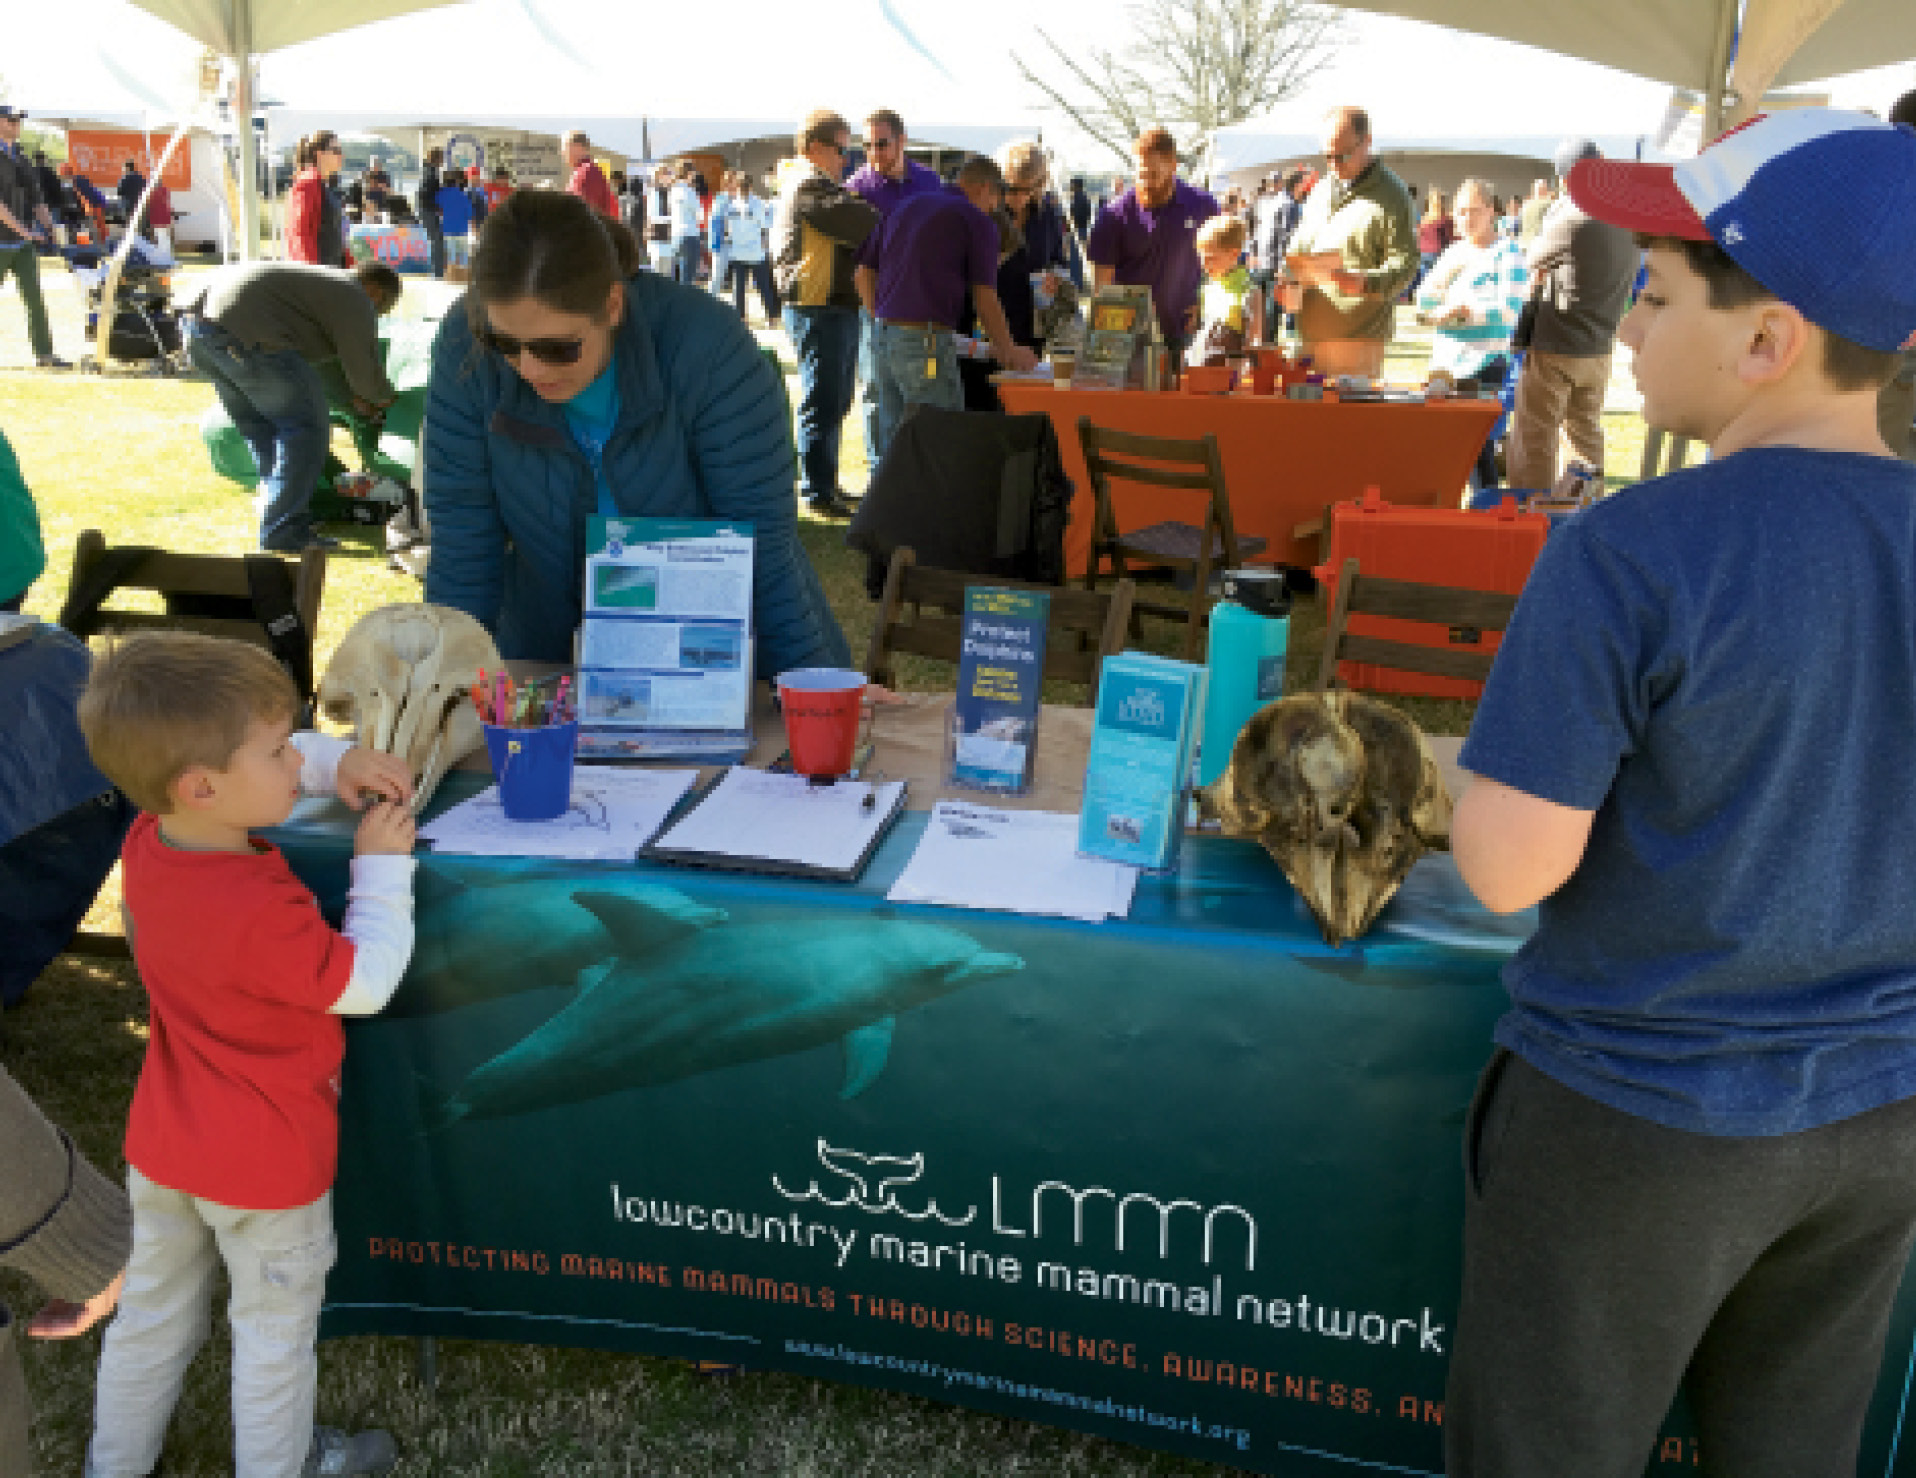 Lowcountry Marine Mammal Network (LMMN) volunteers coordinate beach patrols and various outreach programs to educate the public about dolphin protection.